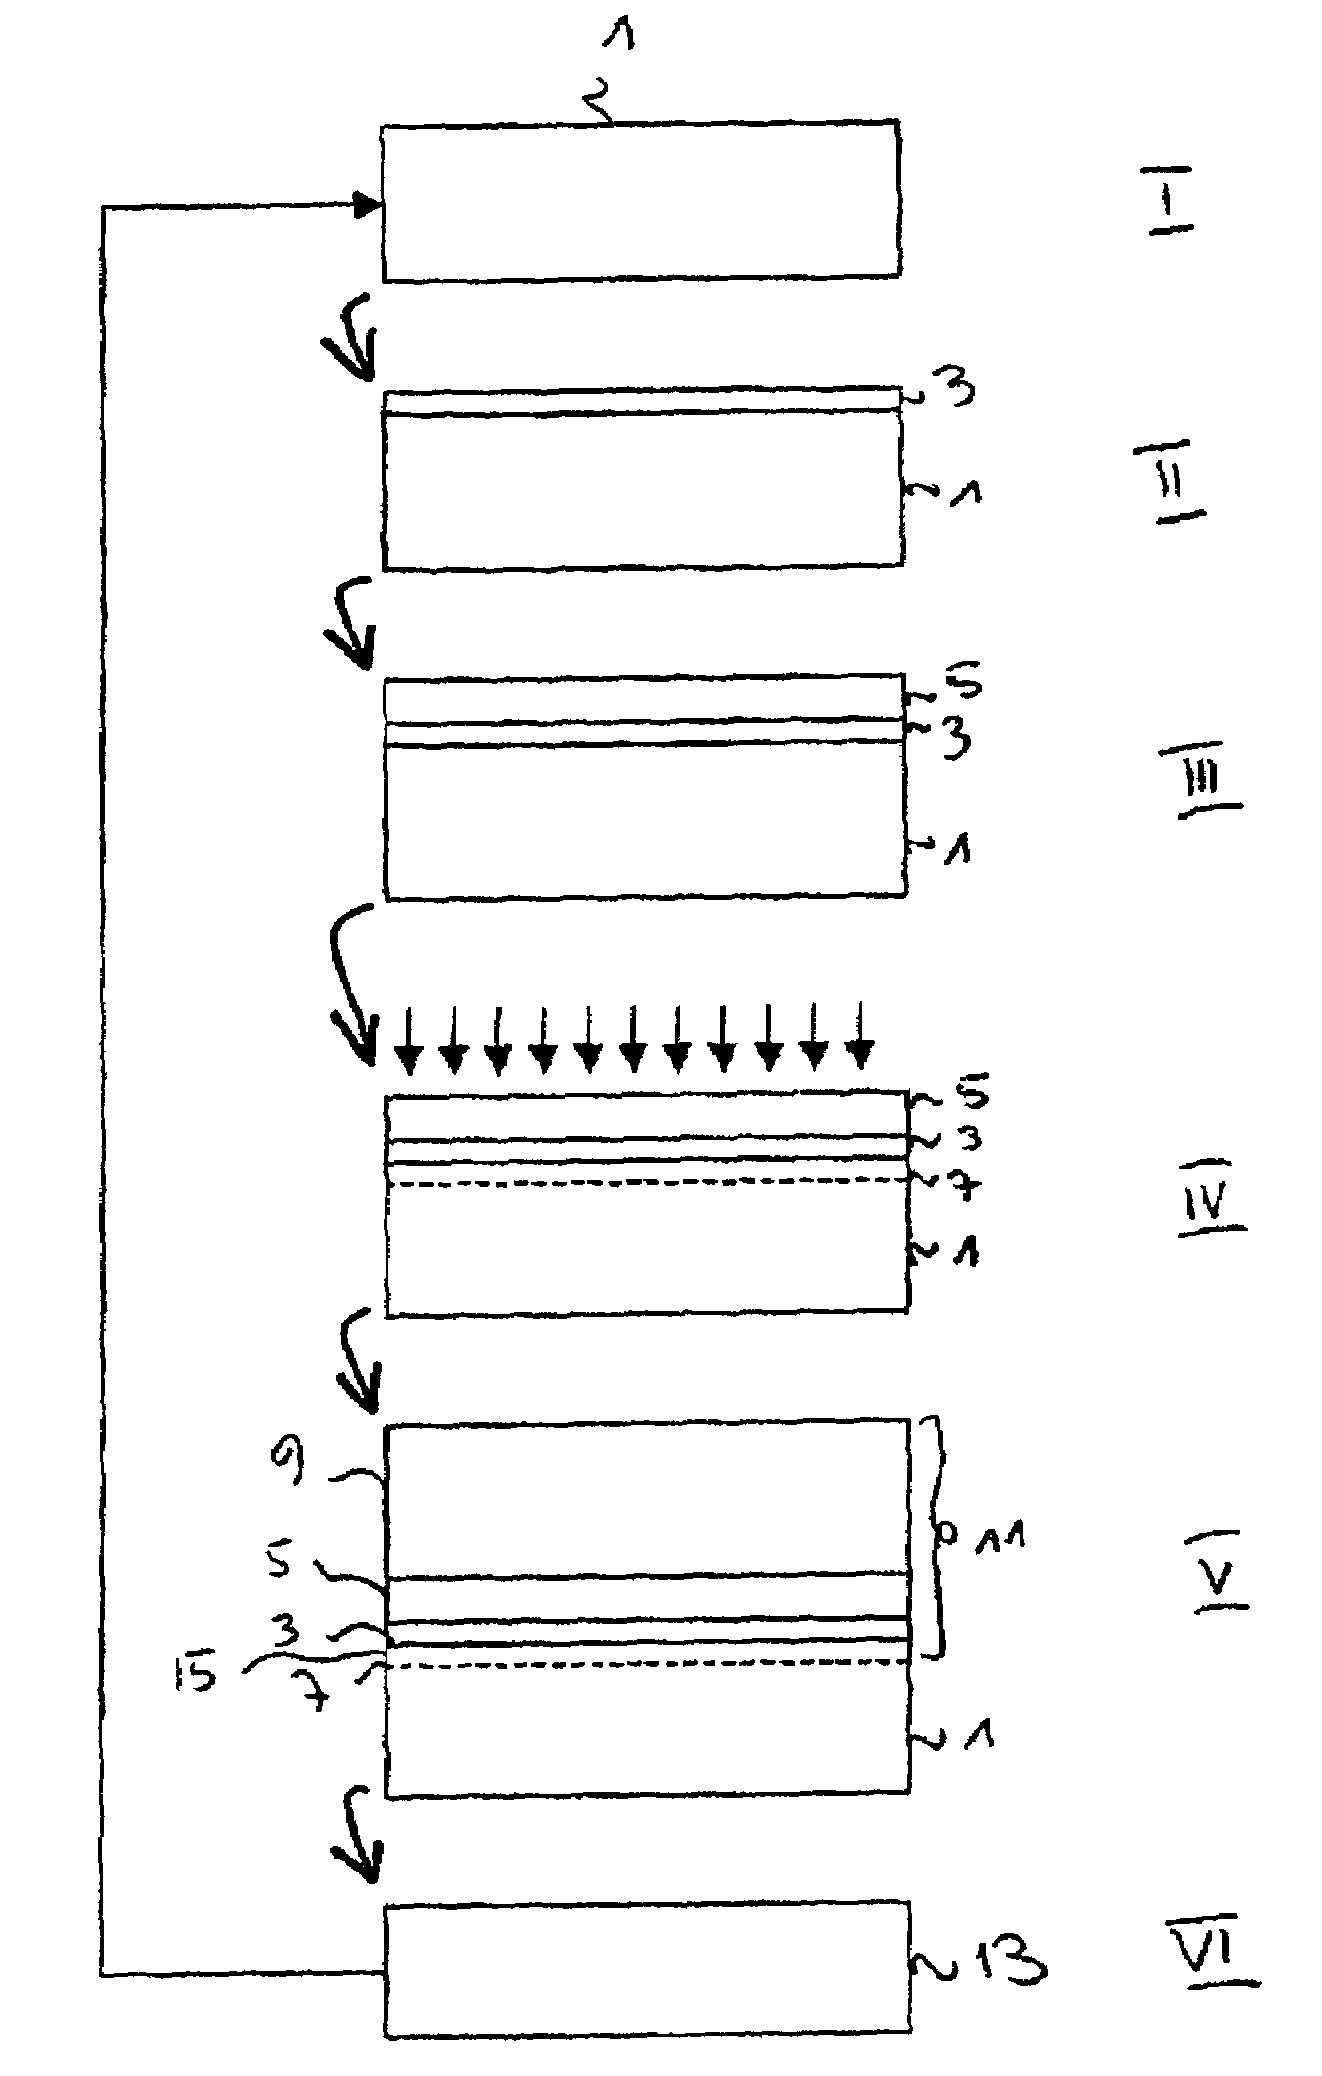 Methods for manufacturing compound-material wafers and for recycling used donor substrates